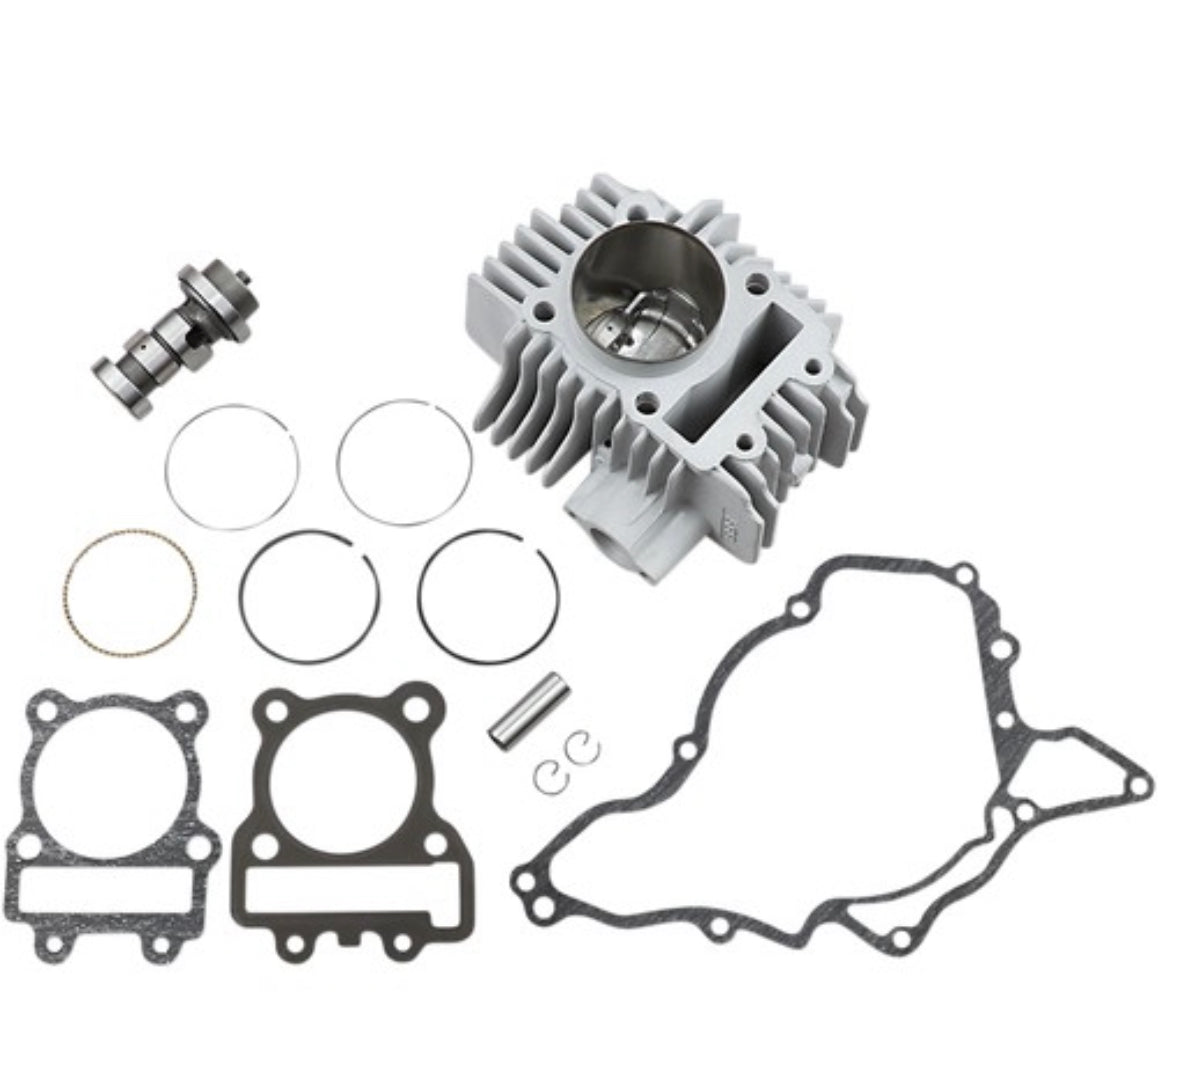 BBR 143cc Big Bore Kit without Camshaft